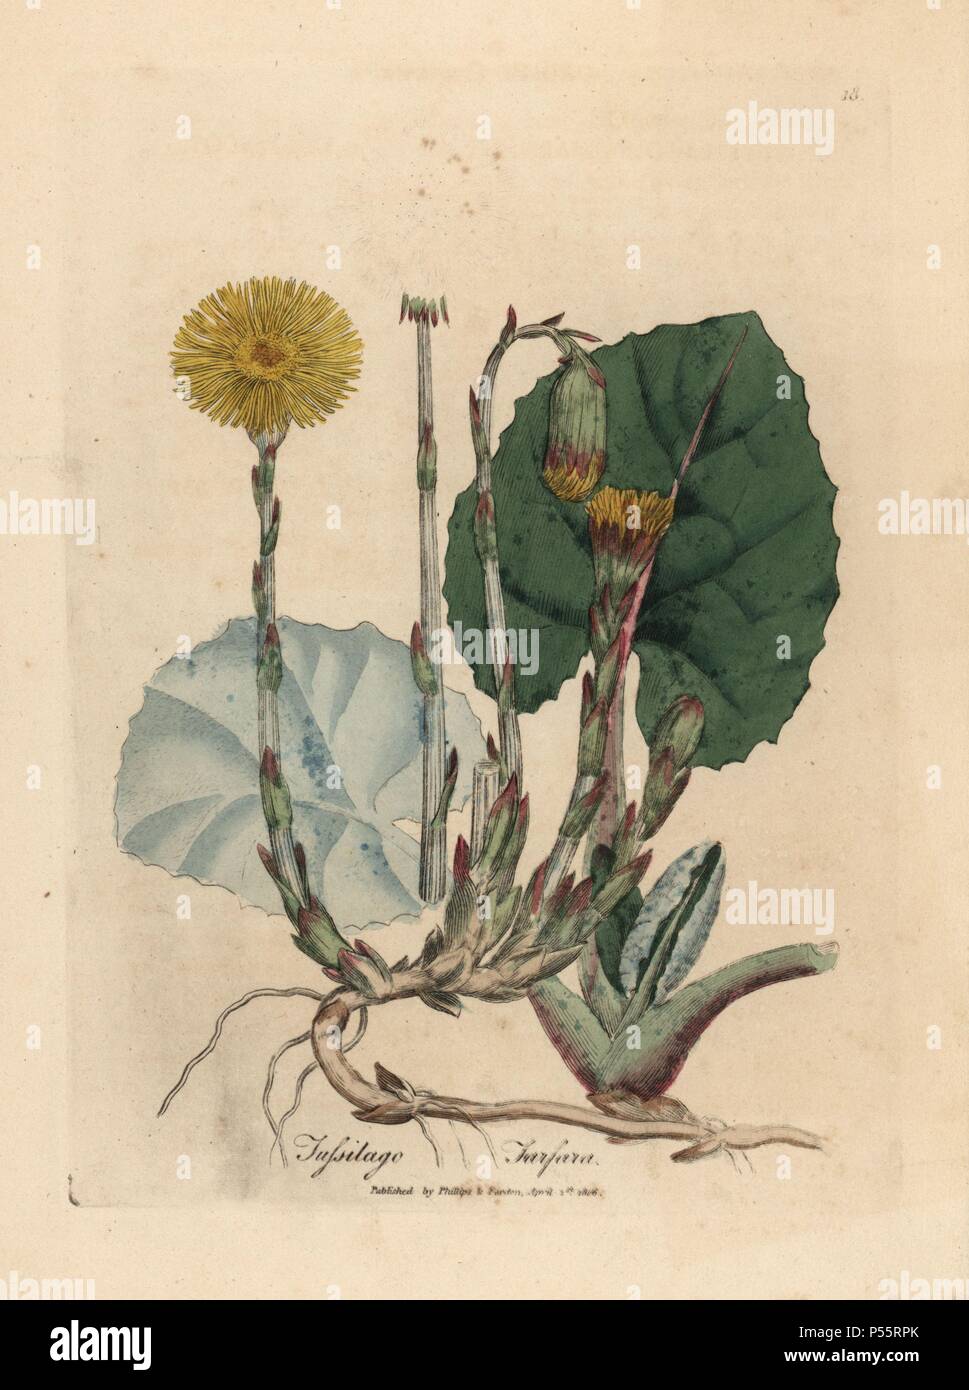 Coltsfoot, Tussilago farfara. Handcoloured copperplate engraving from a botanical illustration by James Sowerby from William Woodville and Sir William Jackson Hooker's 'Medical Botany,' John Bohn, London, 1832. The tireless Sowerby (1757-1822) drew over 2, 500 plants for Smith's mammoth 'English Botany' (1790-1814) and 440 mushrooms for 'Coloured Figures of English Fungi ' (1797) among many other works. Stock Photo